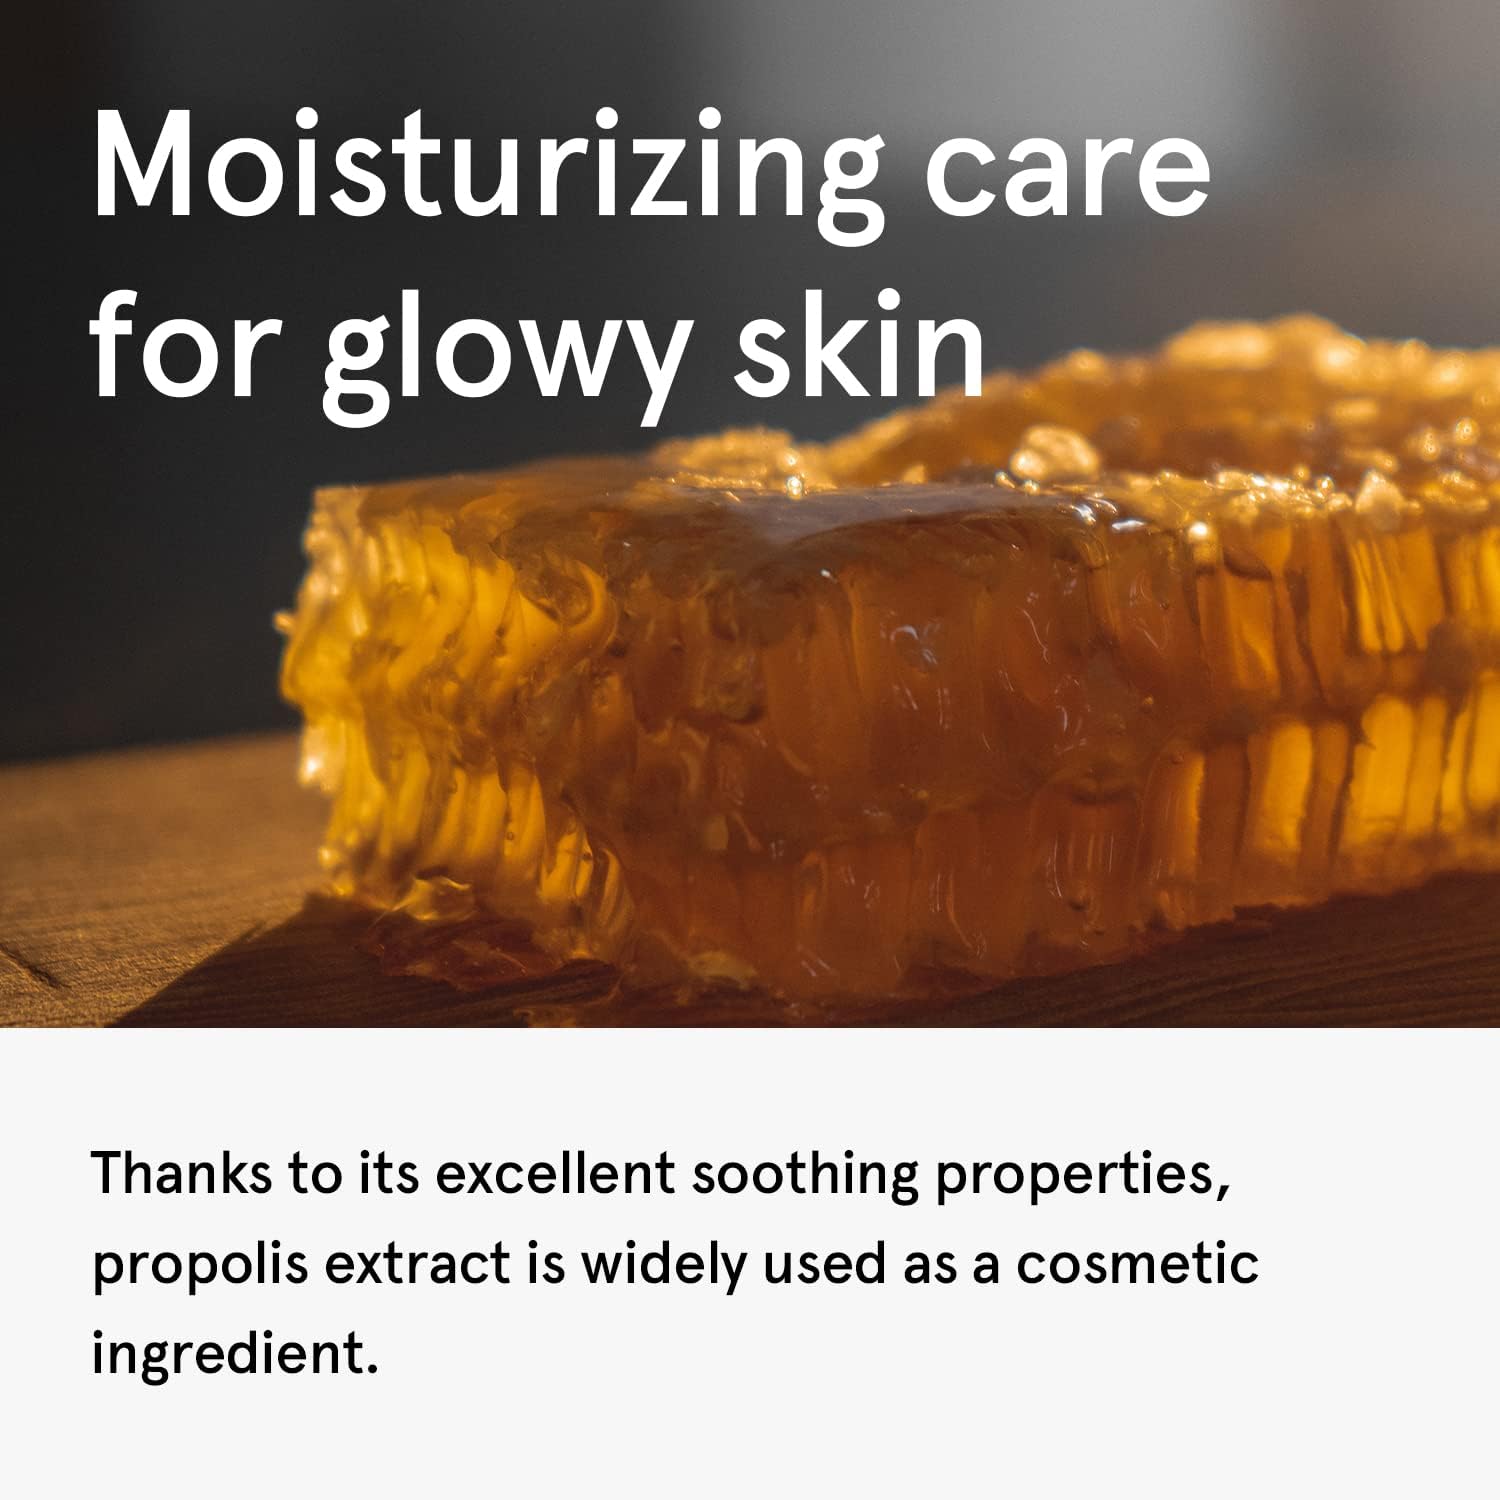 ONE THING Propolis + Honey Extract 150ml - DODOSKIN